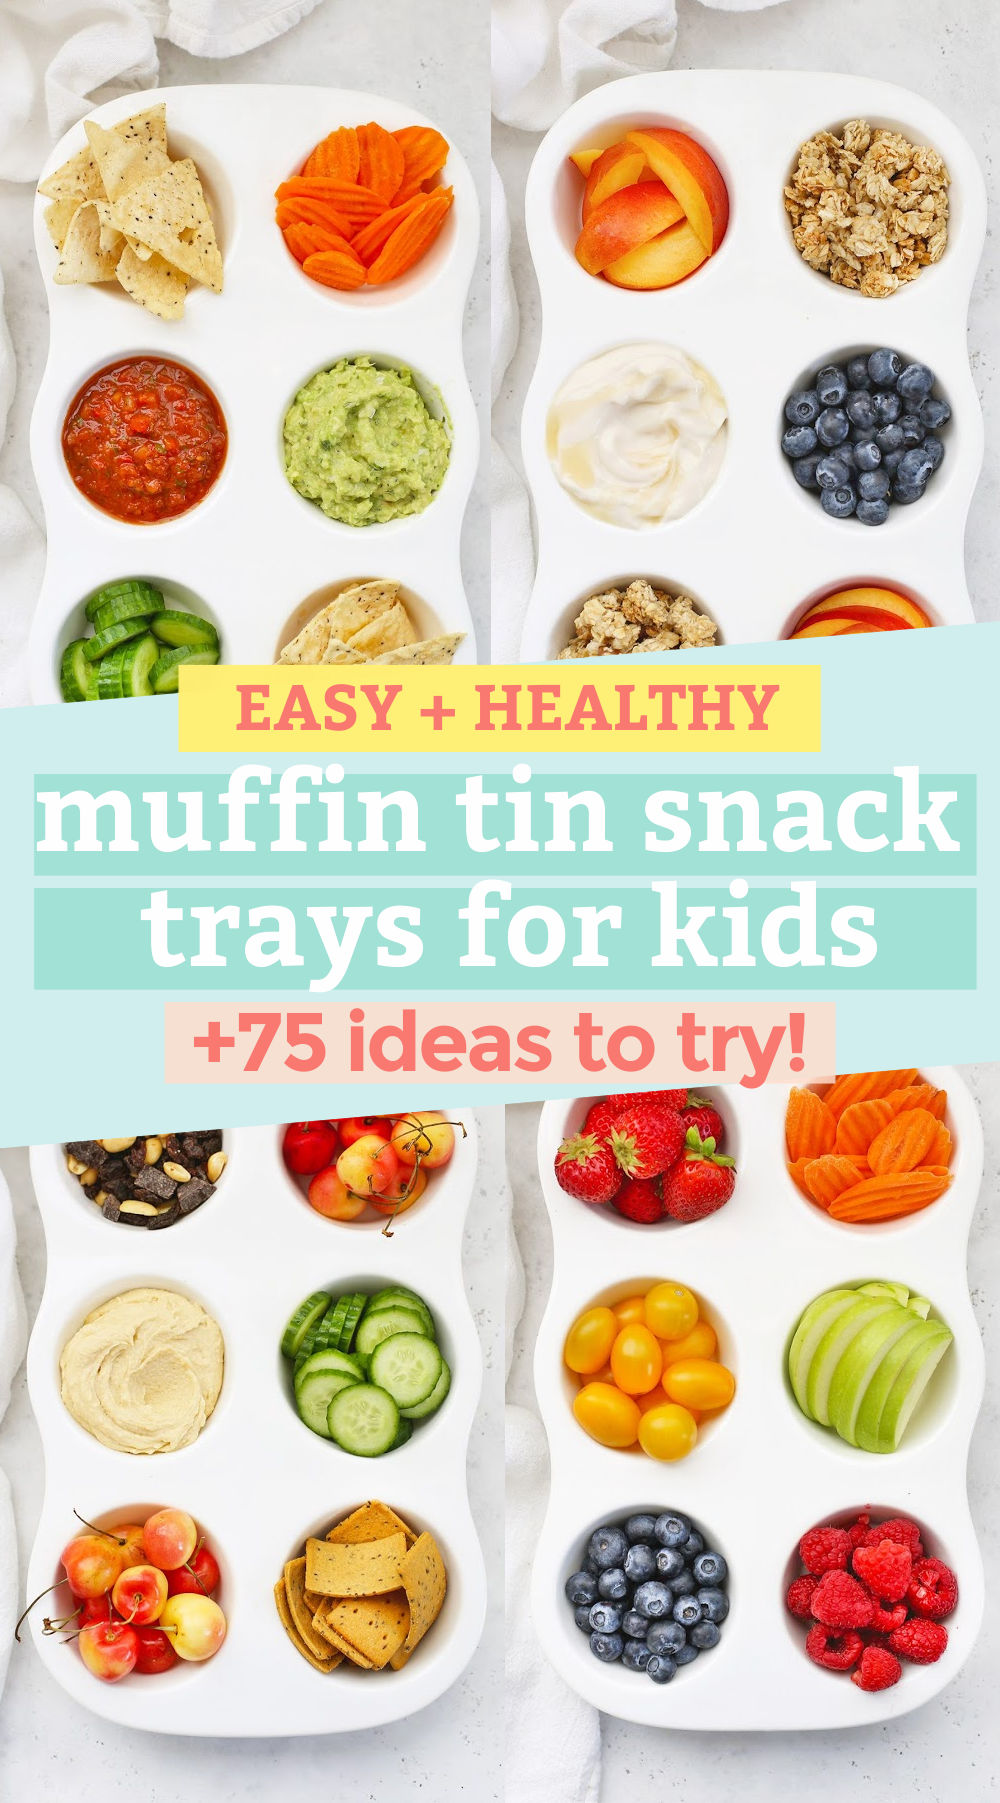 Collage of images of muffin tin snack trays for kids with text overlay that reads "Easy + Healthy Muffin Tin Snack Trays for Kids +75 Ideas to Try"